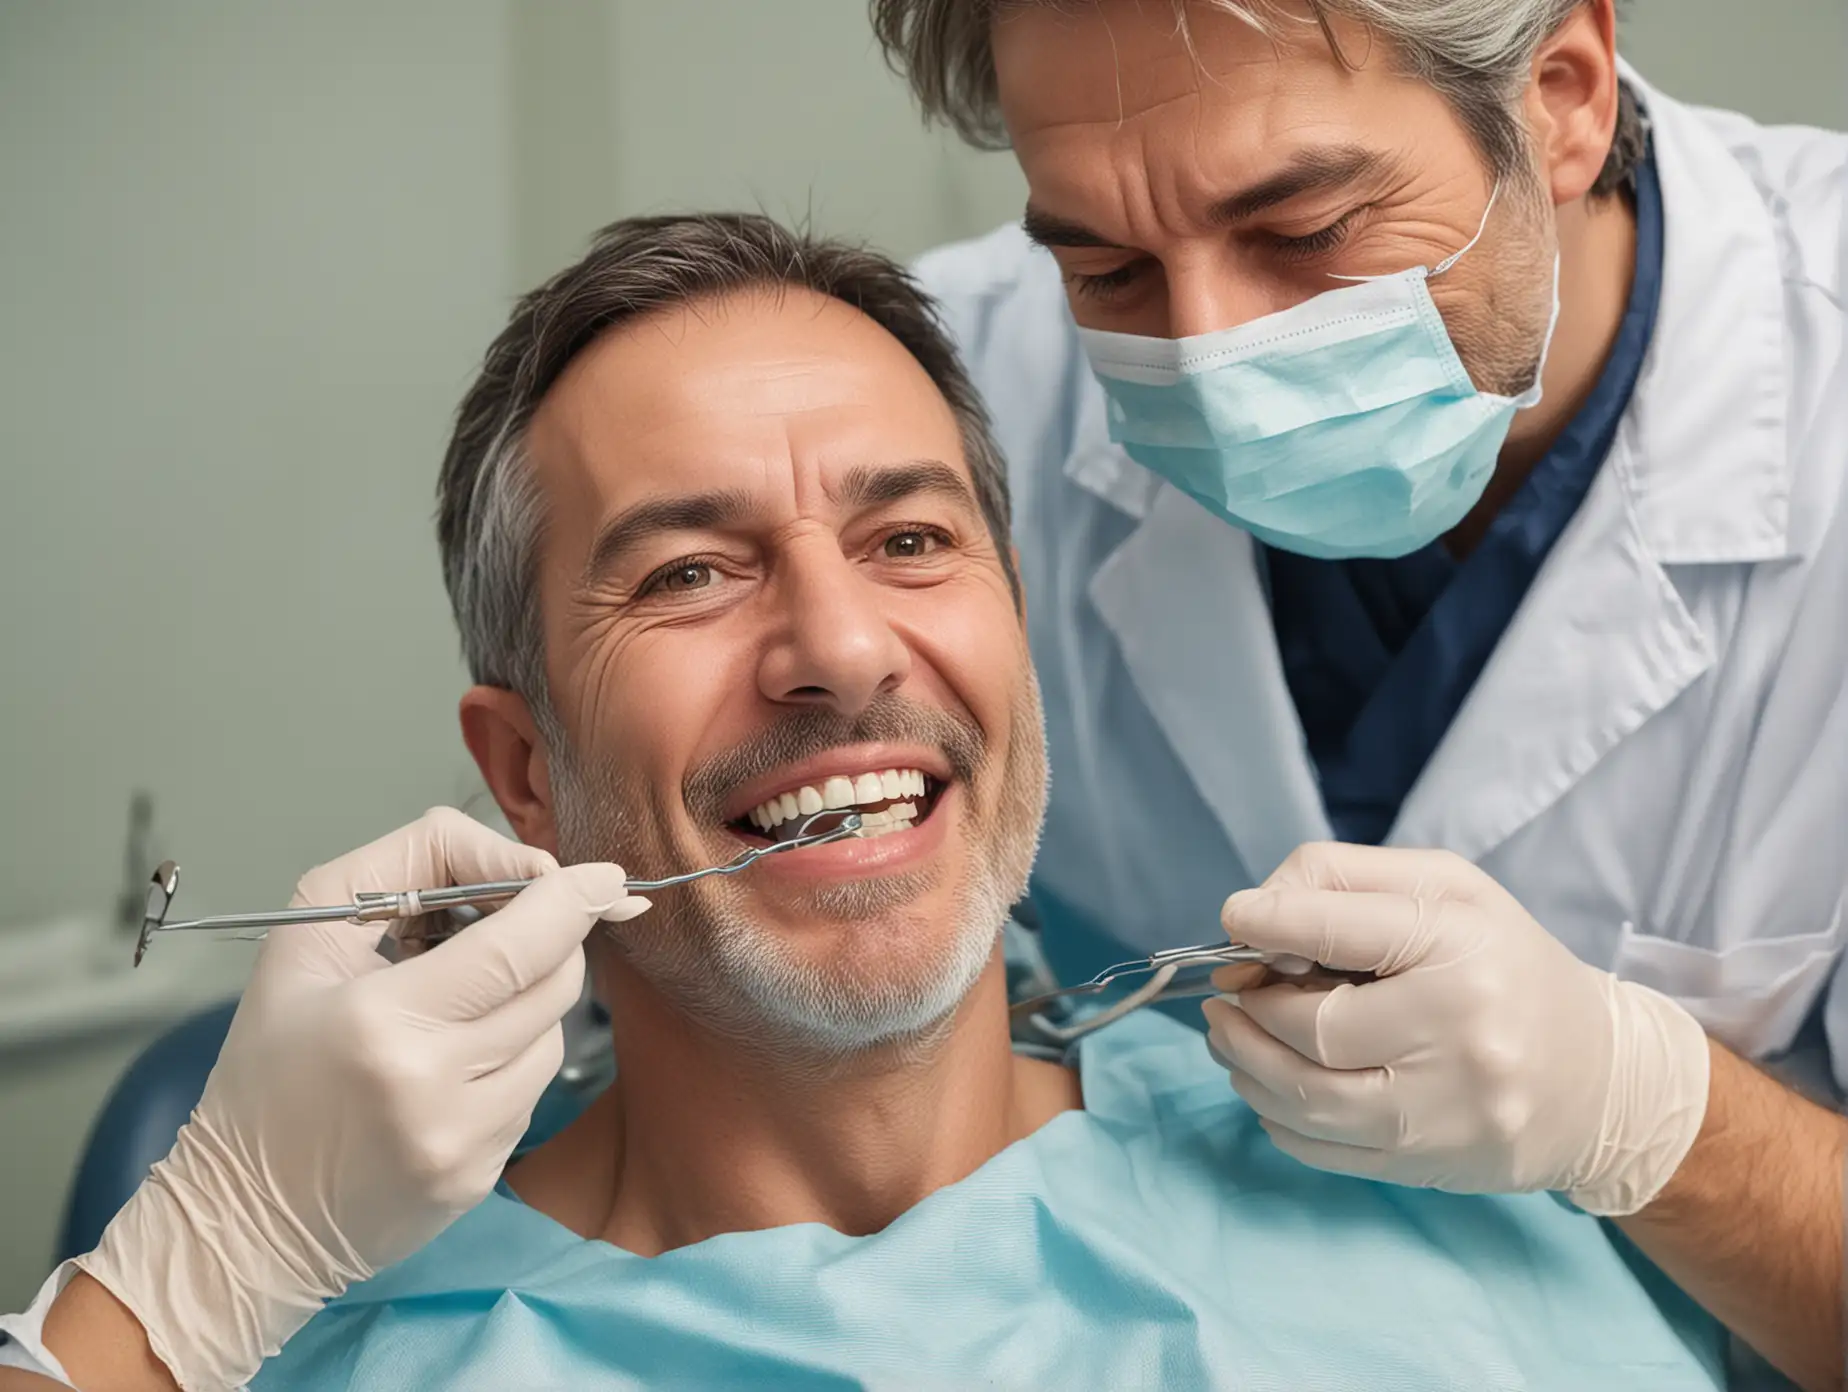 A 50 year old male dentist performing a tooth operation on a patient. The dentist is wearing a mask, the patient, a woman, is not wearing a mask, but she looks calm and happy.